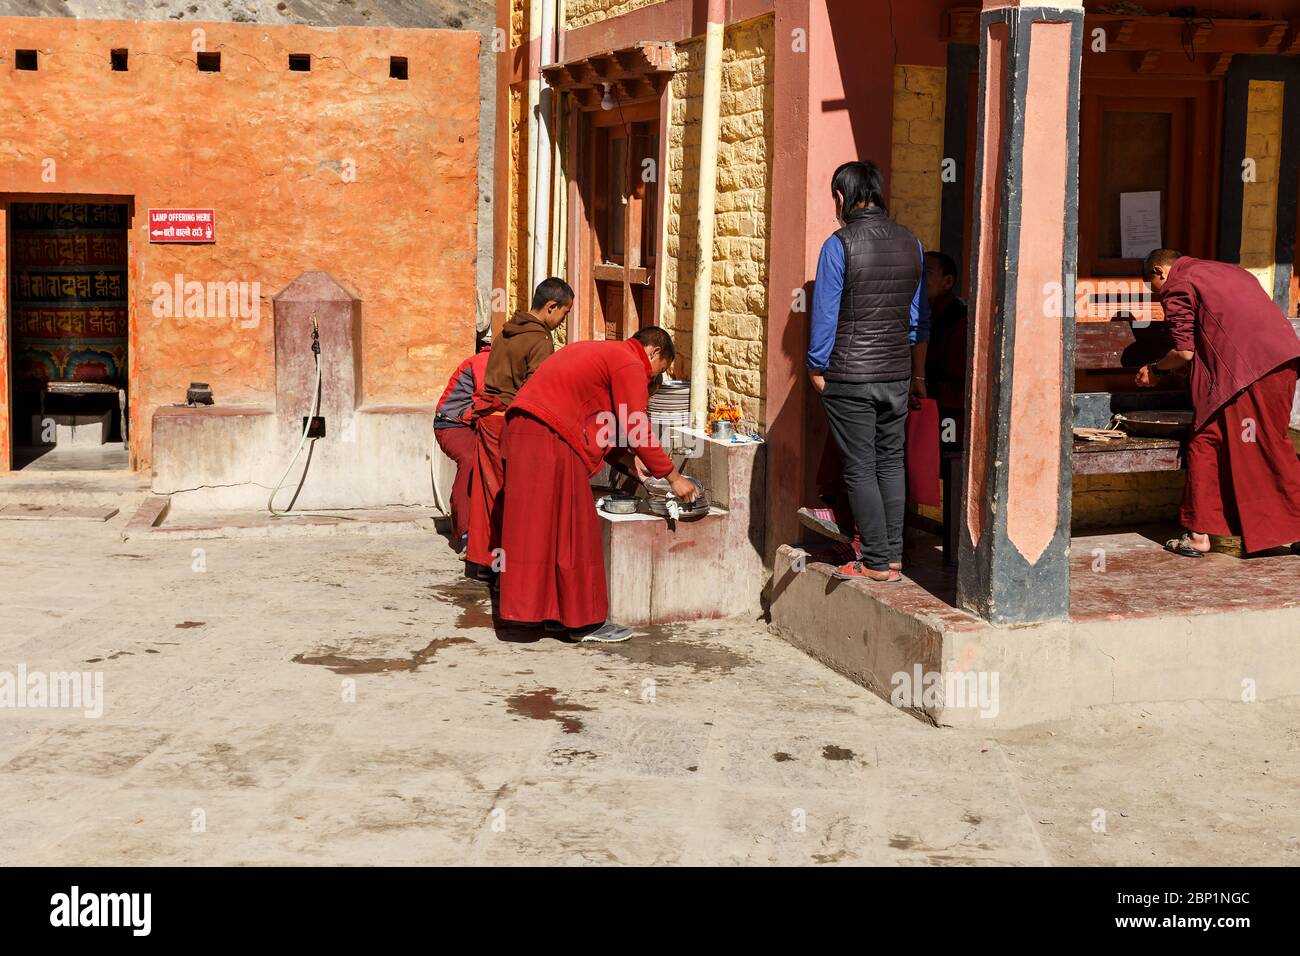 Kagbeni, Mustang District, Nepal - November 19, 2016: Buddhist monks teenagers wash dishes after dinner in the courtyard of the temple. Stock Photo